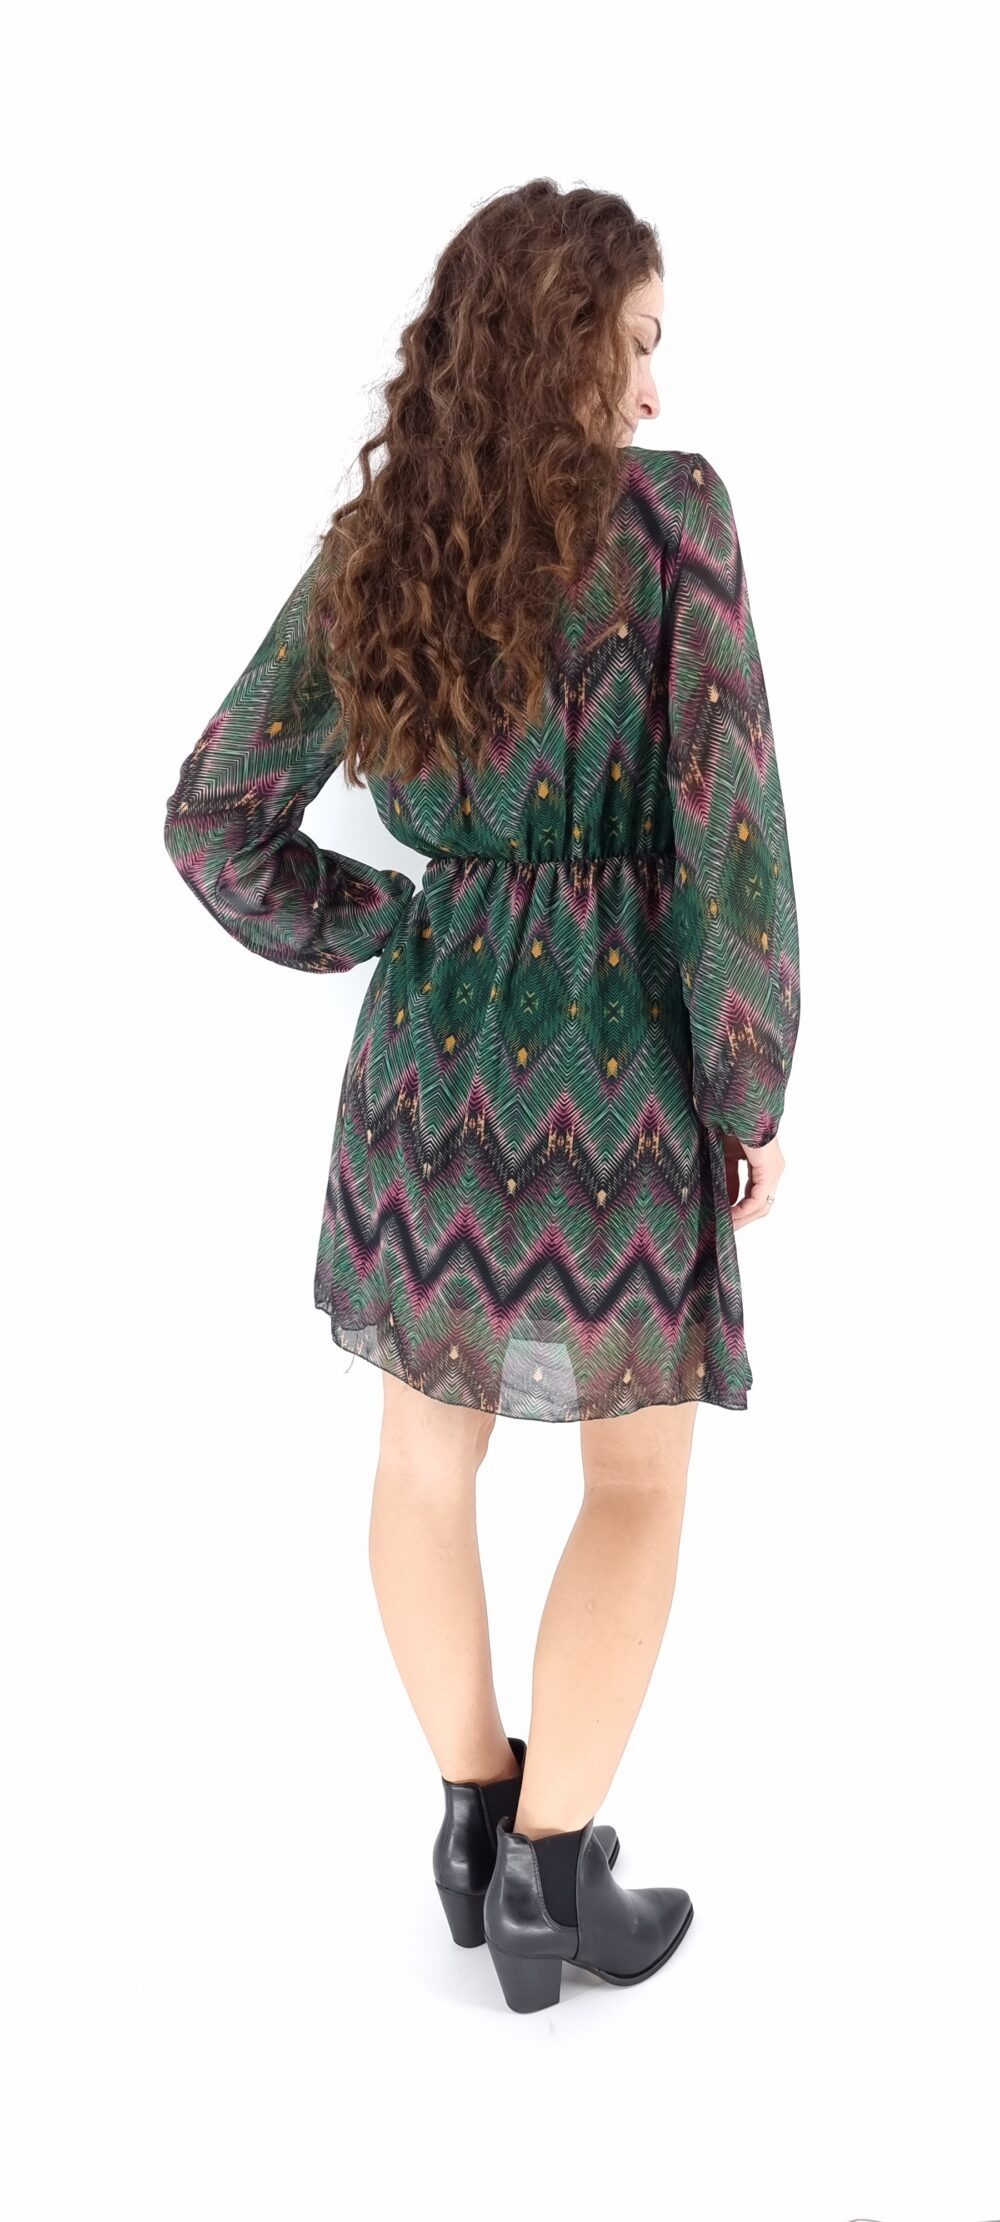 Short cruise dress with colorful pattern in green shades